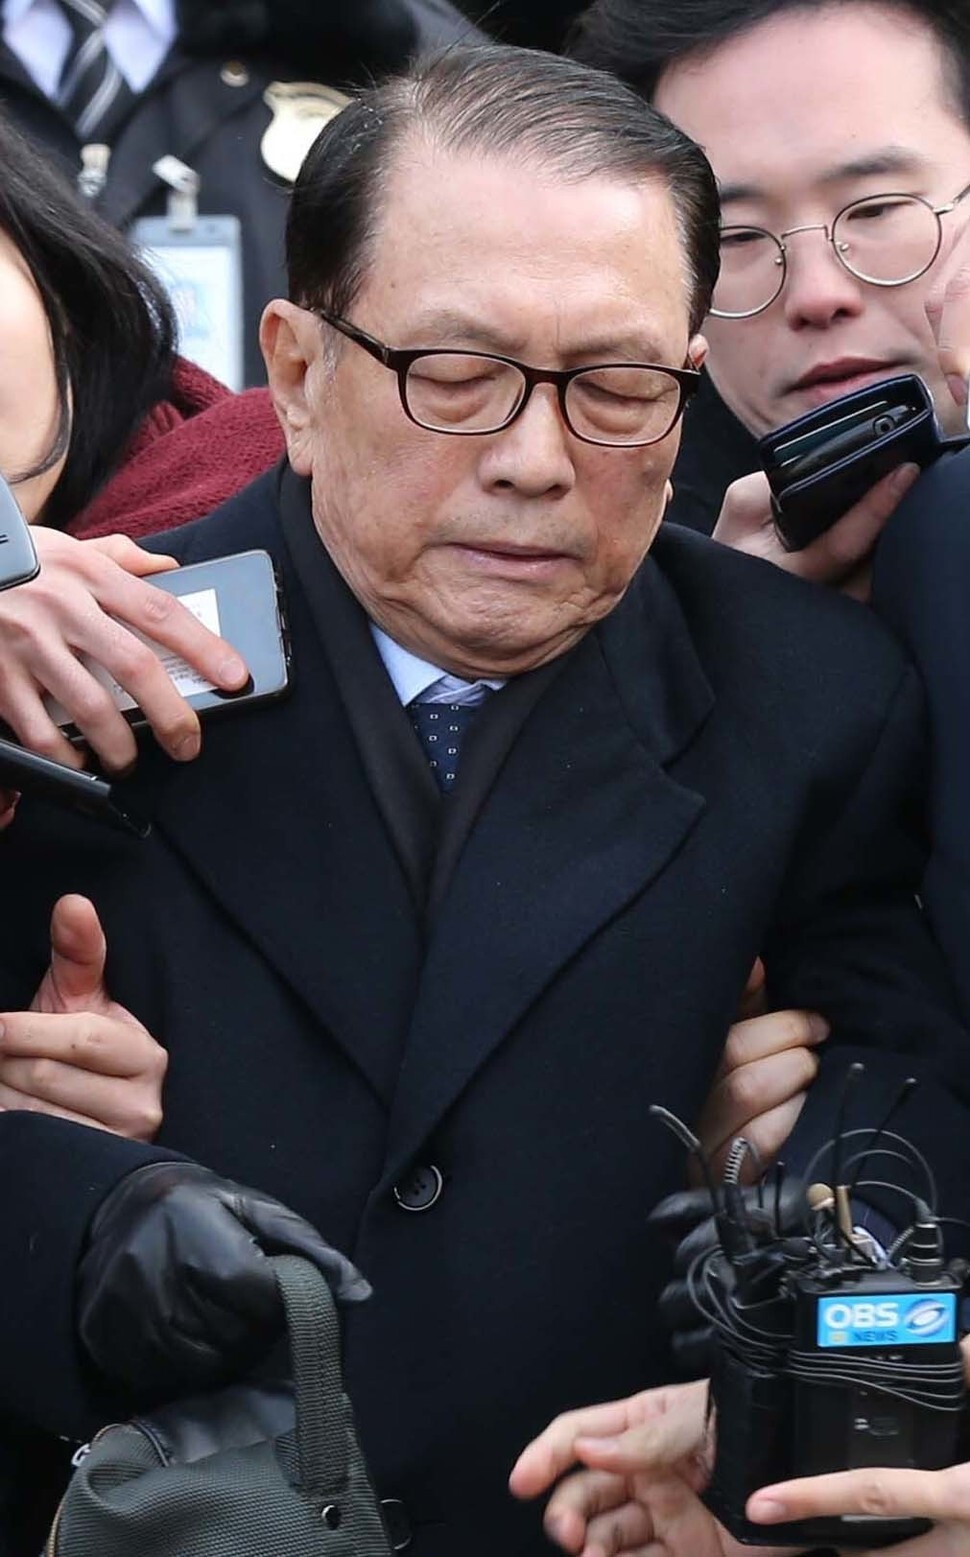 Former Blue House Chief of Staff Kim Ki-choon arrives at the offices of the Special Prosecutor’s team in Seoul’s Gangnam district